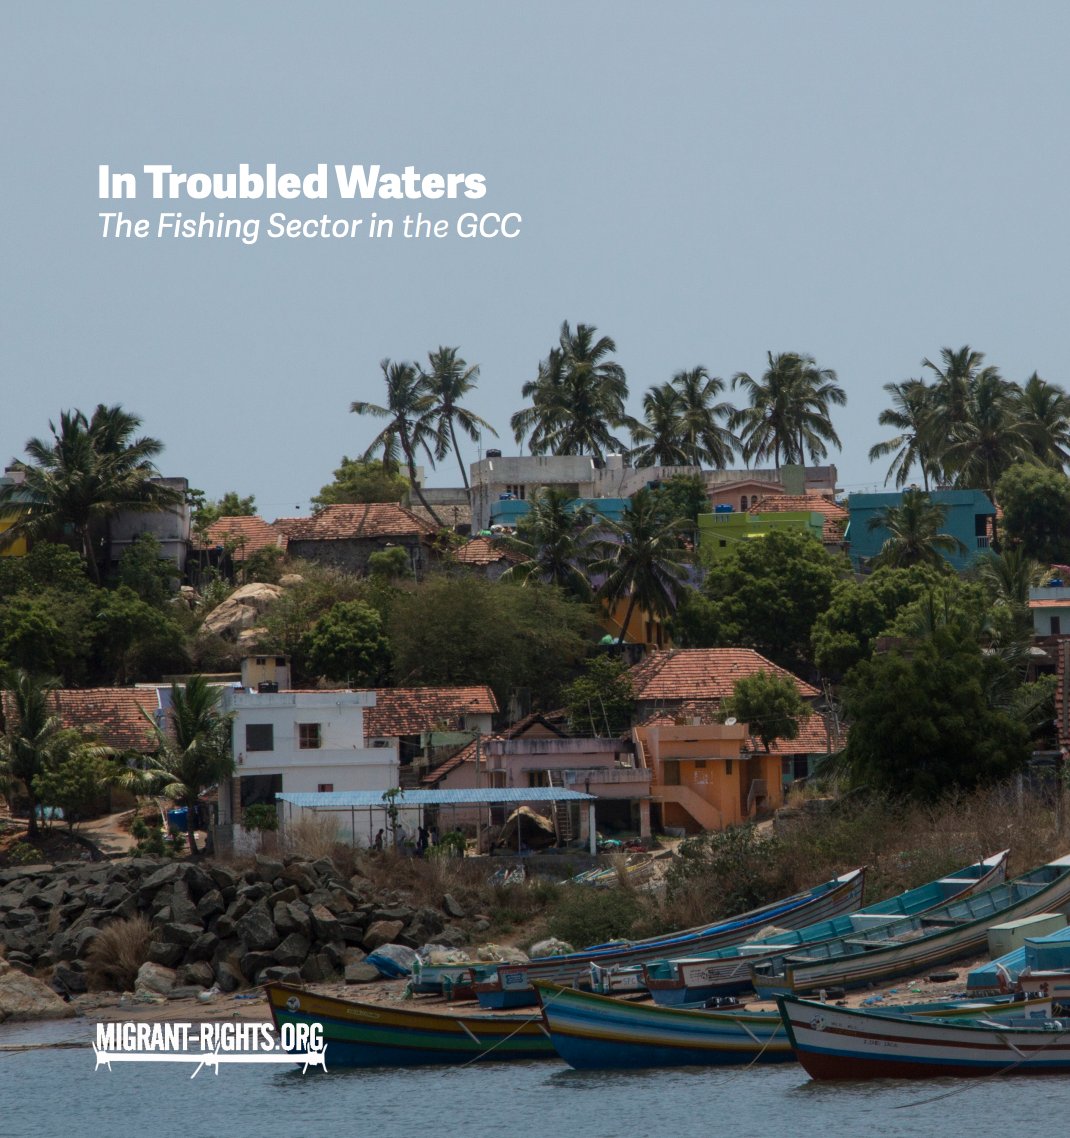 A PDF of “In Troubled Waters: The Fishing Sector in GCC” can be accessed here.  #2020Review  https://www.migrant-rights.org/wp-content/uploads/2020/01/Fishermen-White-Paper-Jan4.pdf